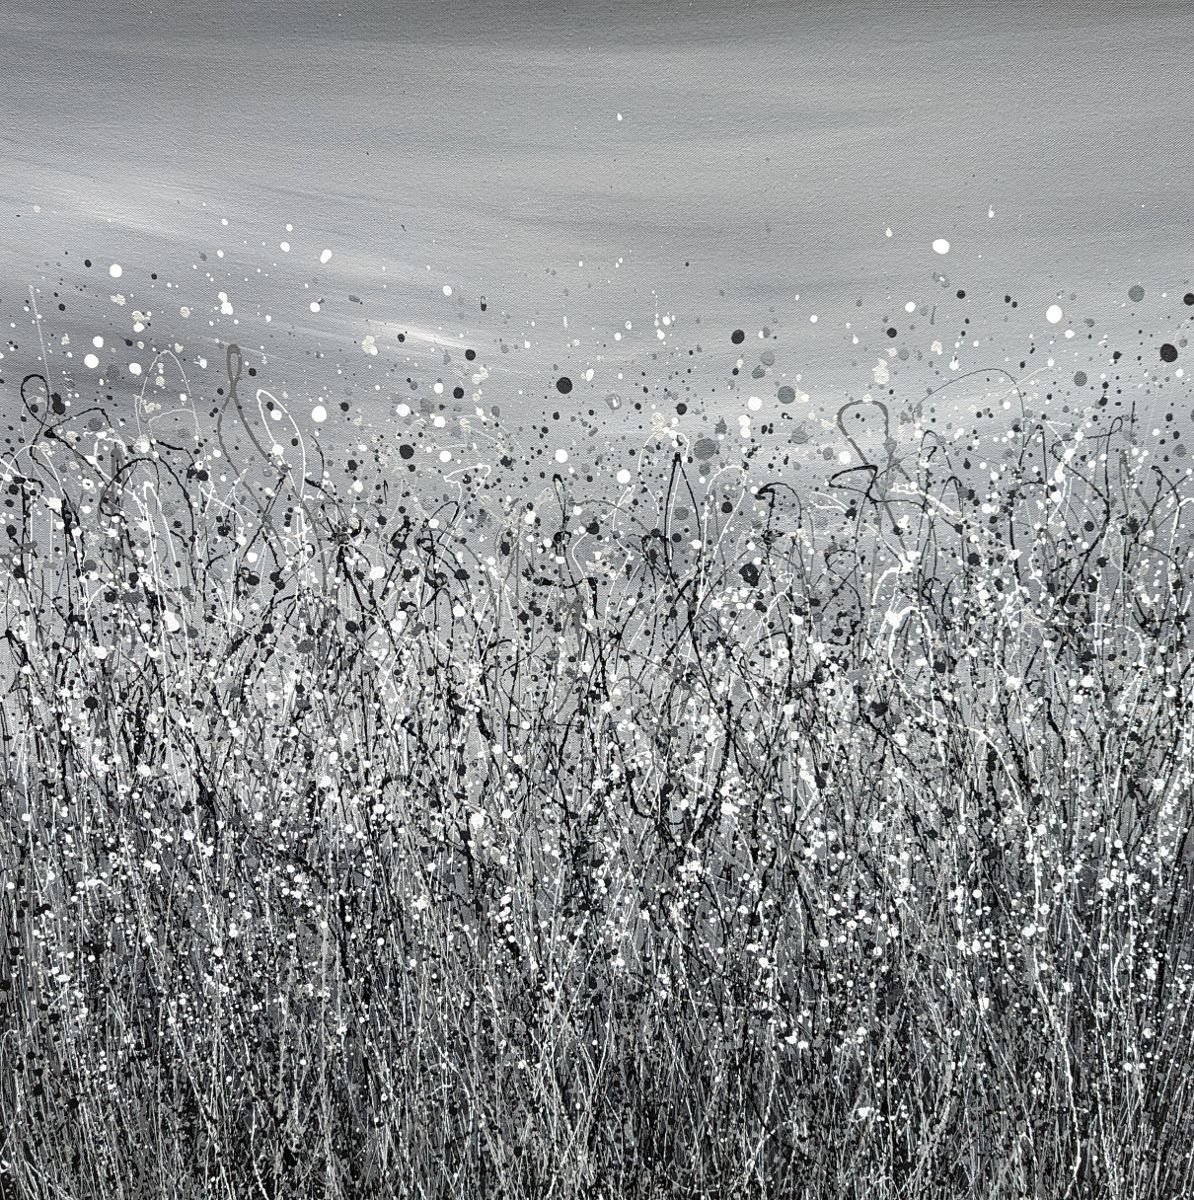 Monochrome Whispers #2 by Lucy Moore